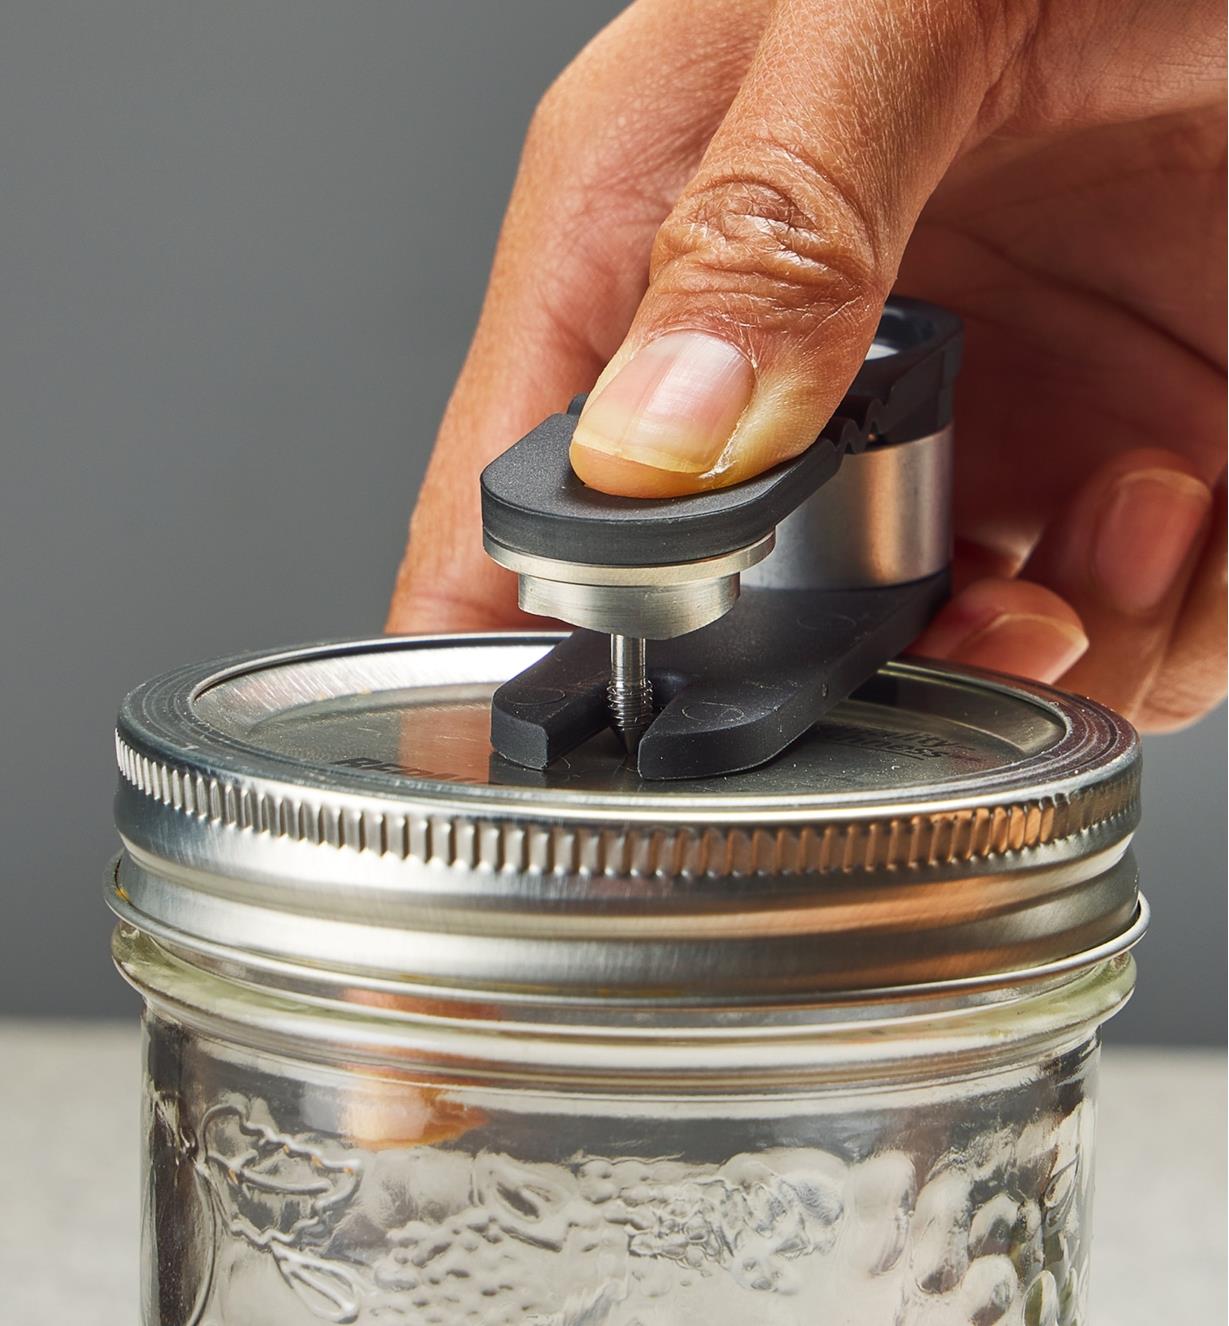 Using a tool included with the Airtender system to punch a hole in the lid of a Mason jar